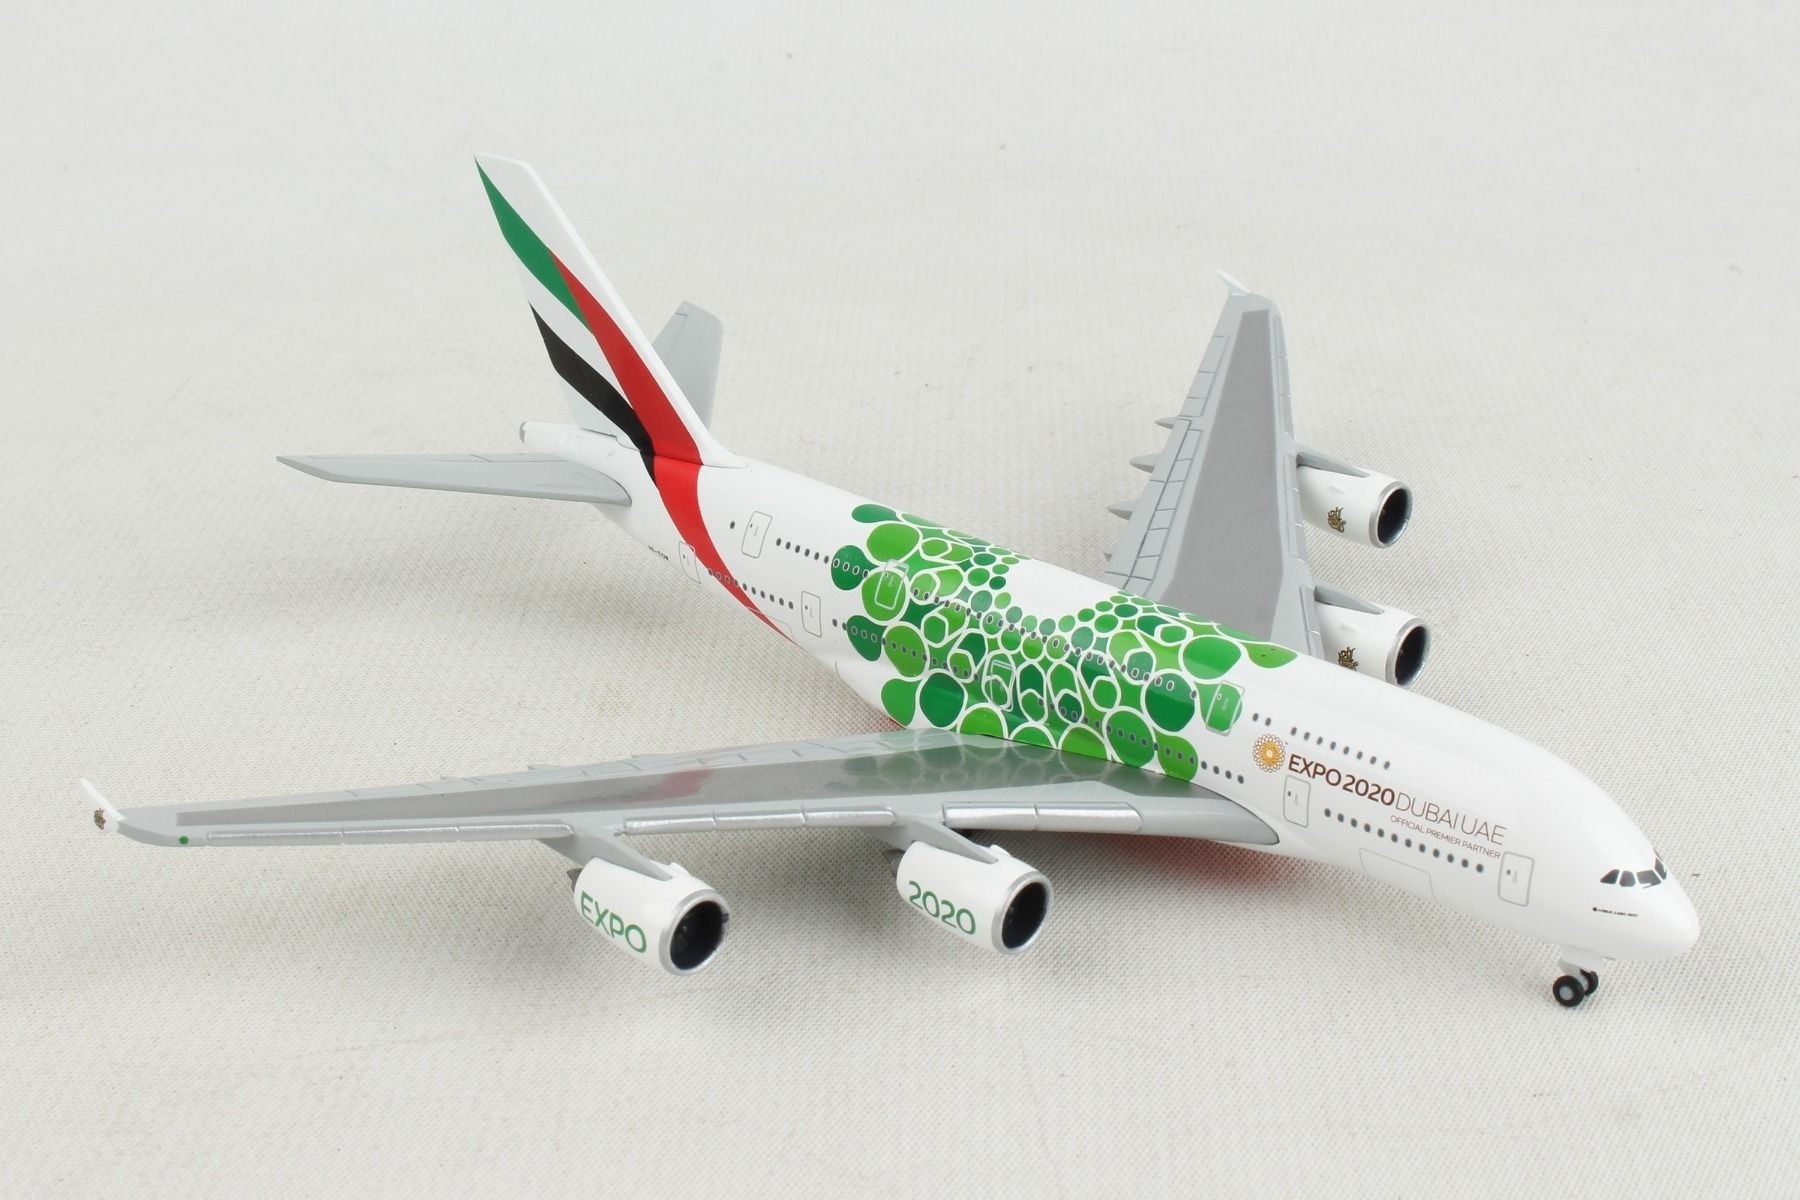 Herpa Wings 1:500 Emirates a380 expo 2020 Dubaï /"Sustainability/" livery 533522